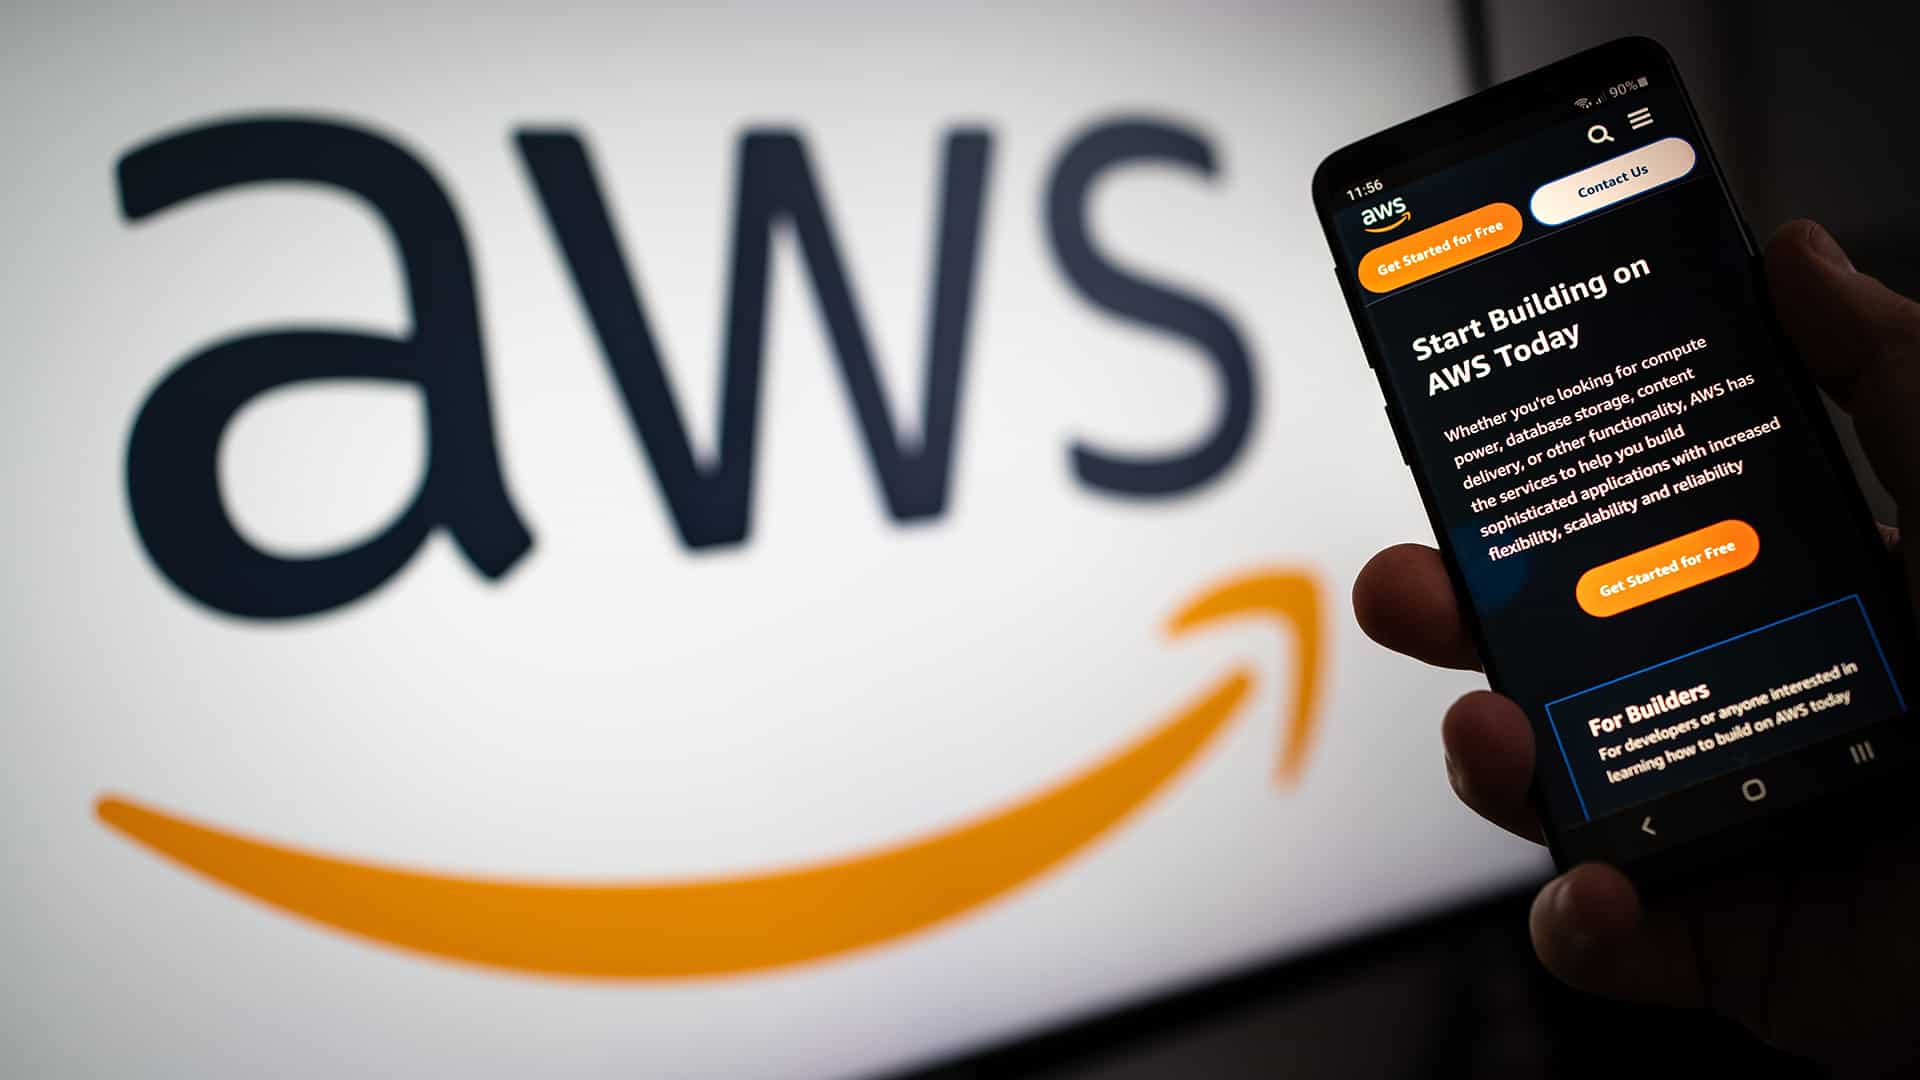 AWS logo in the background and on a phone